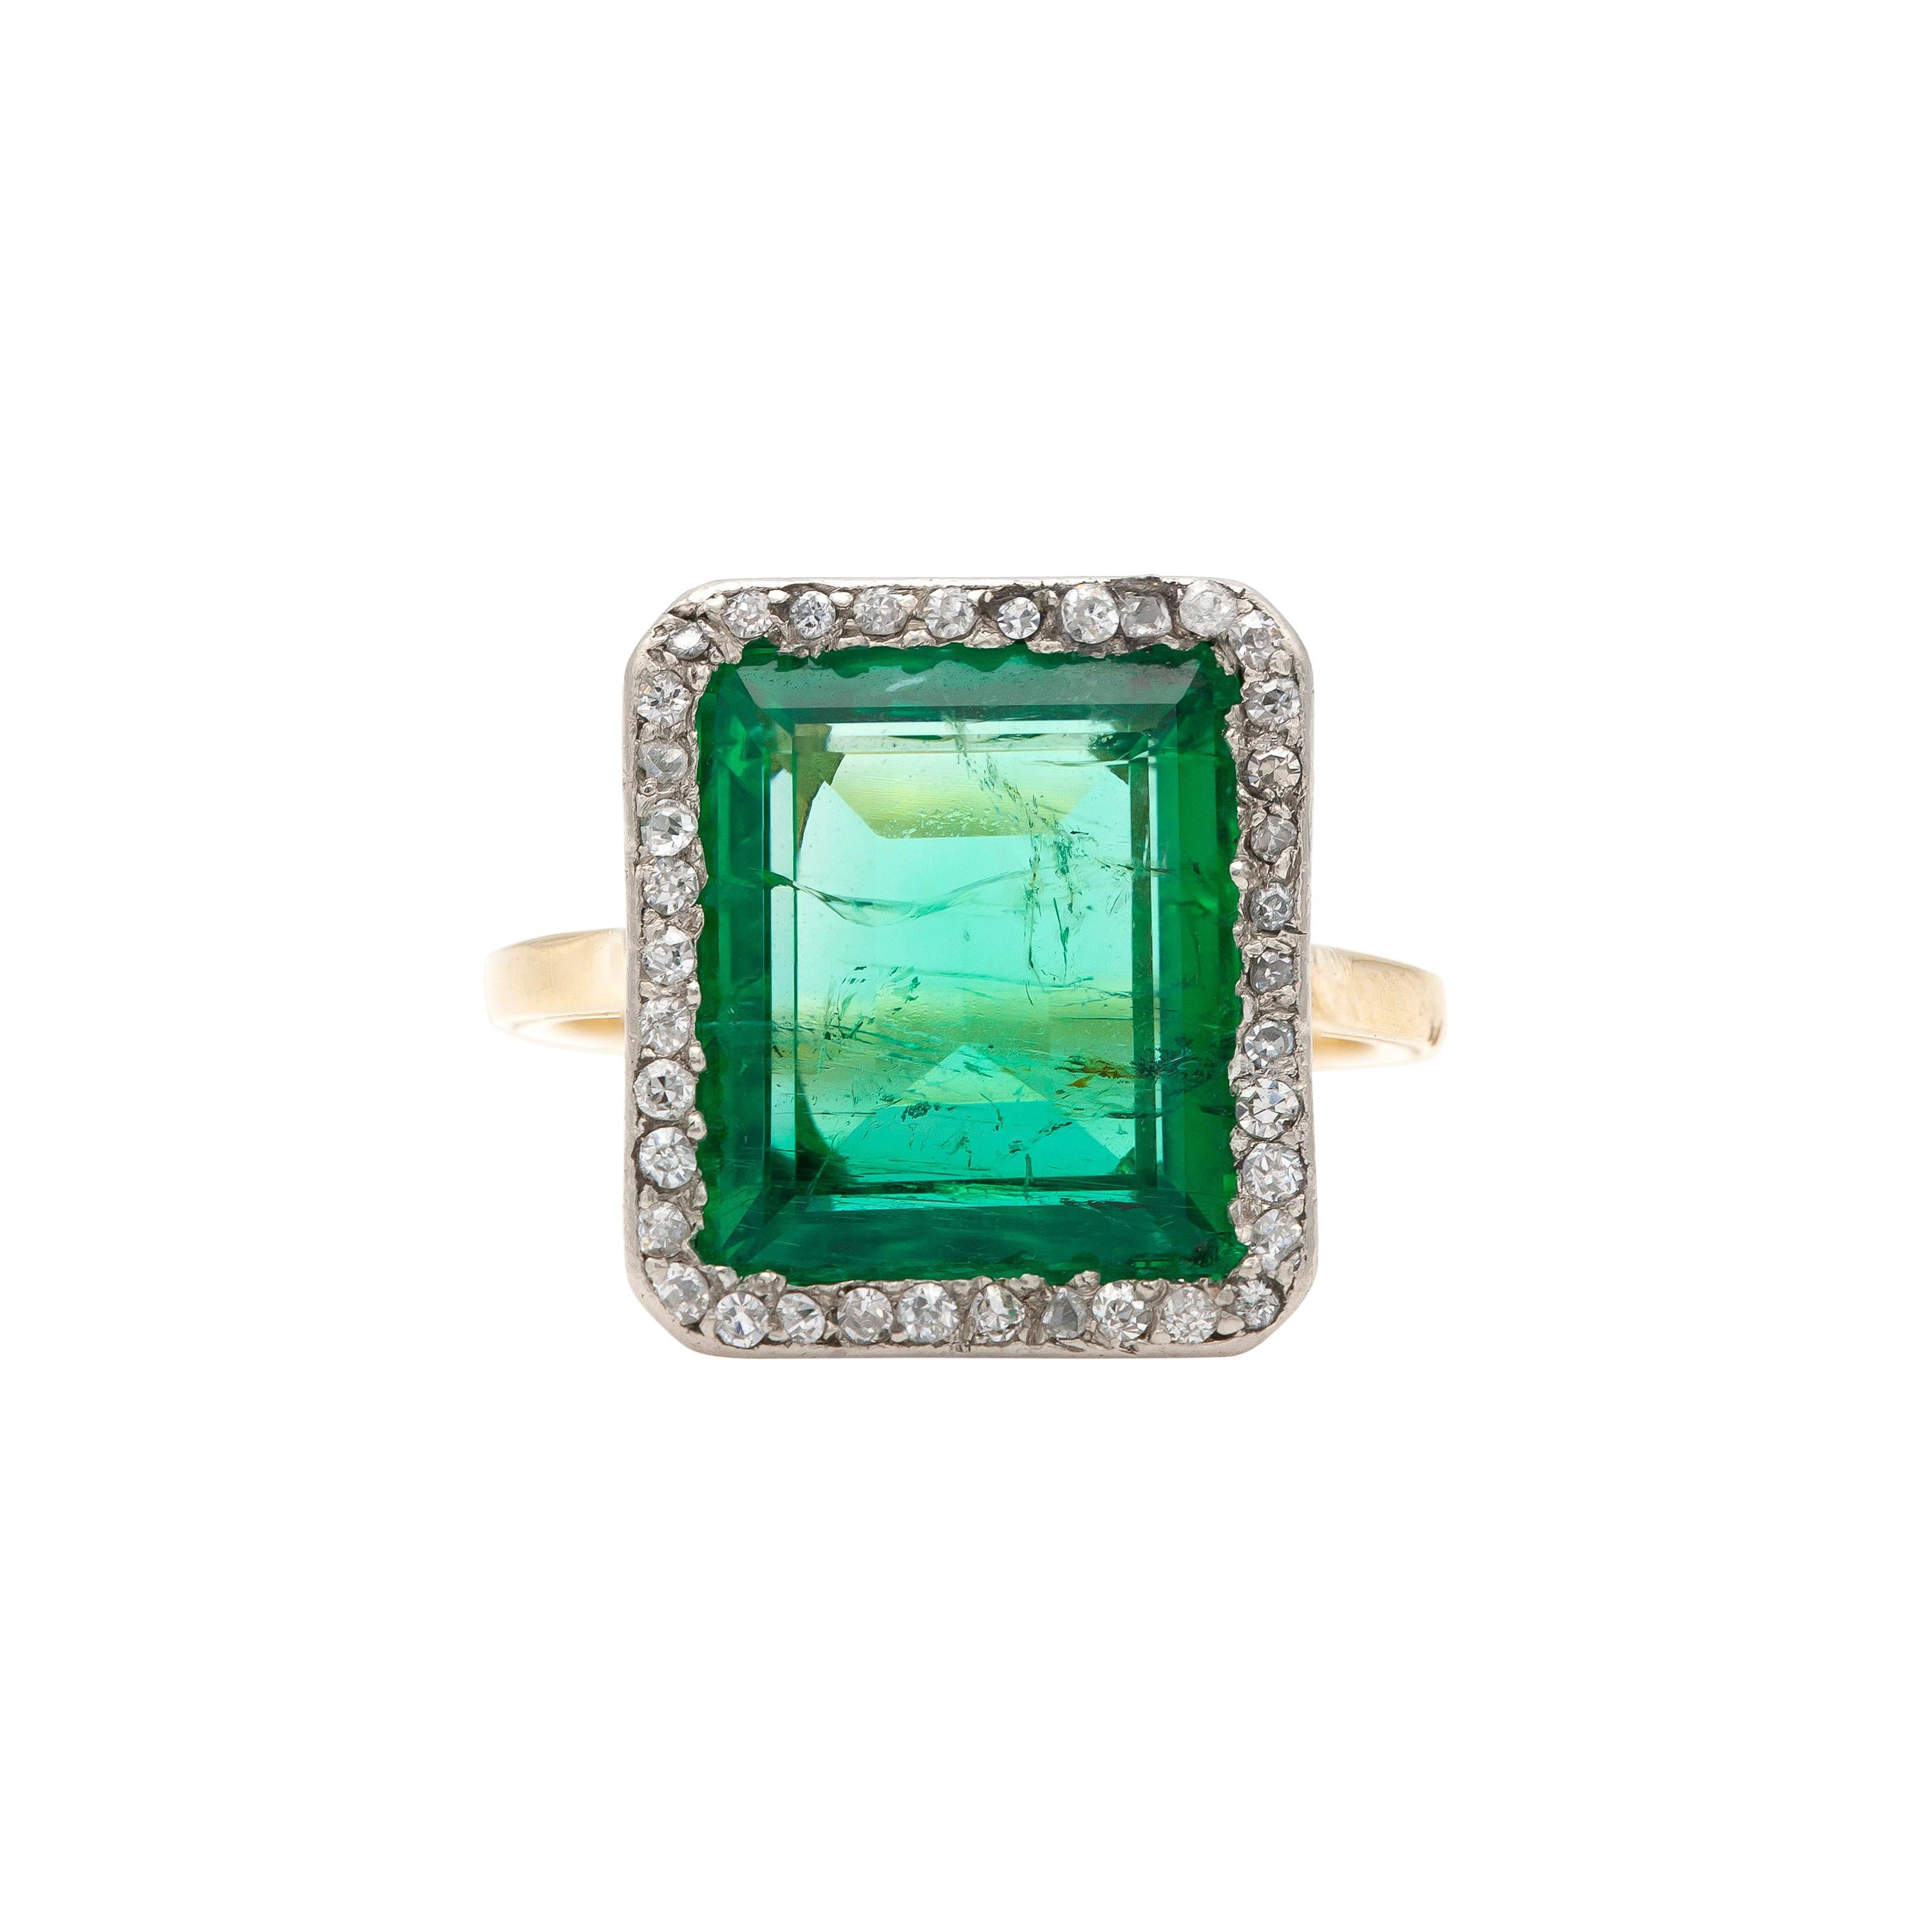 Russian Ural Mountains Emerald Ring with Diamonds